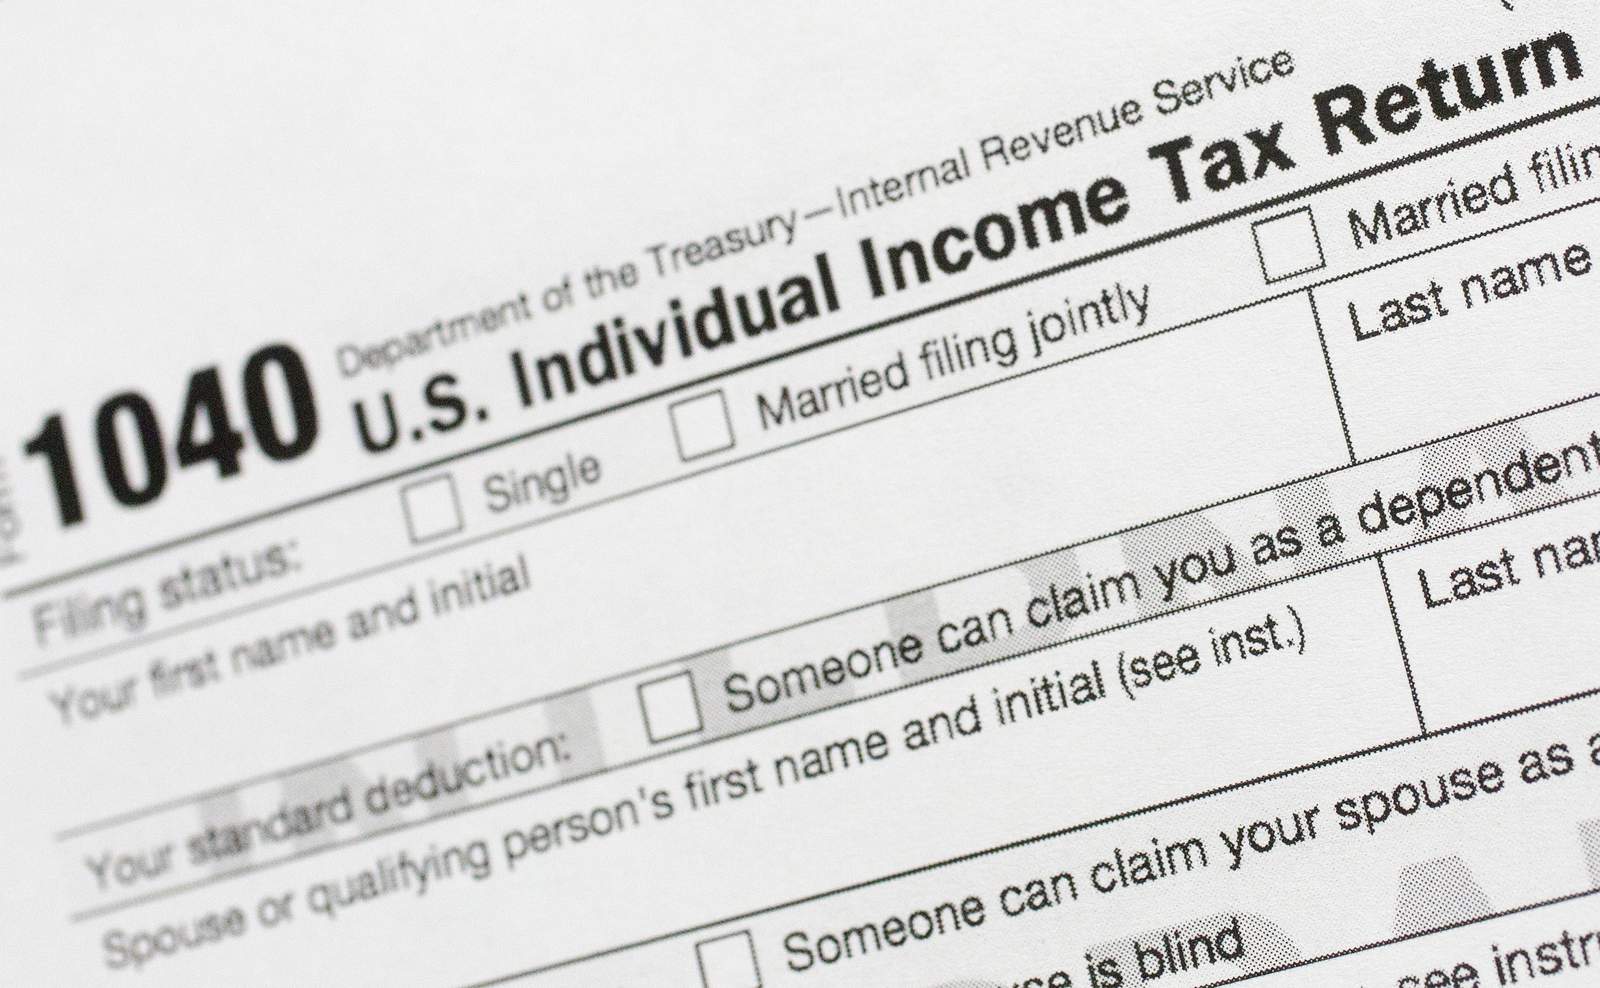 Like everything else 2020, taxes will be like no other year